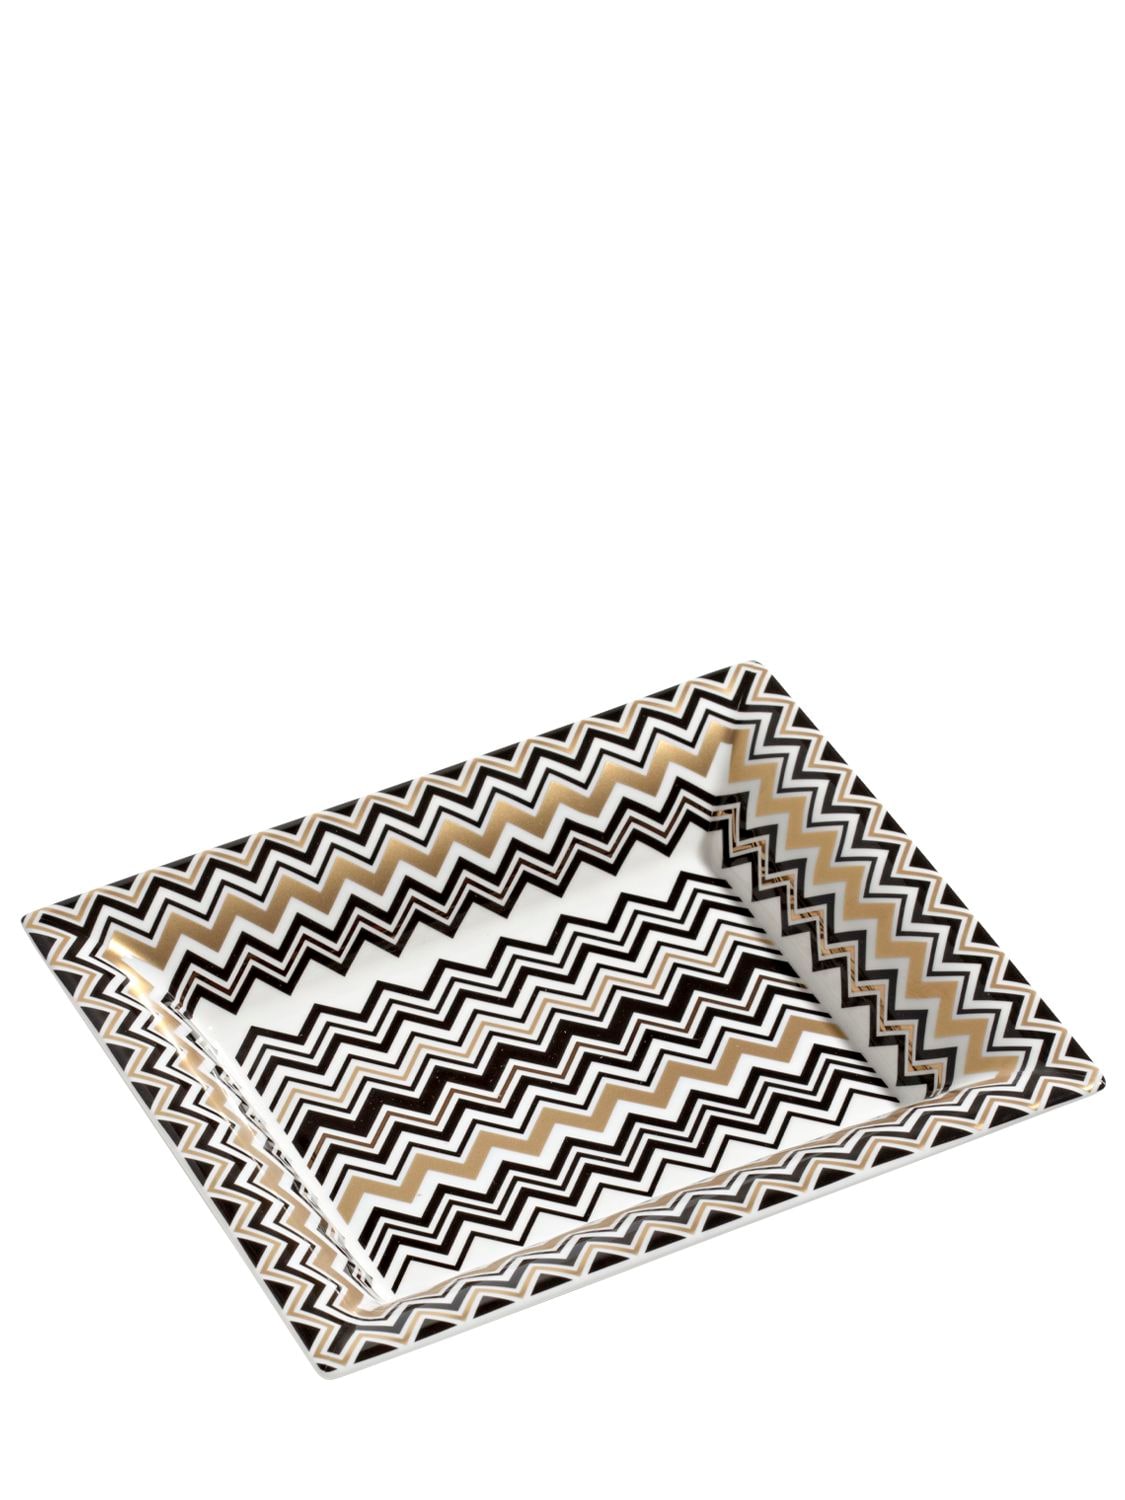 Missoni Home Collection Zig Zag Gold Rectangular Tray Large In Multicolor